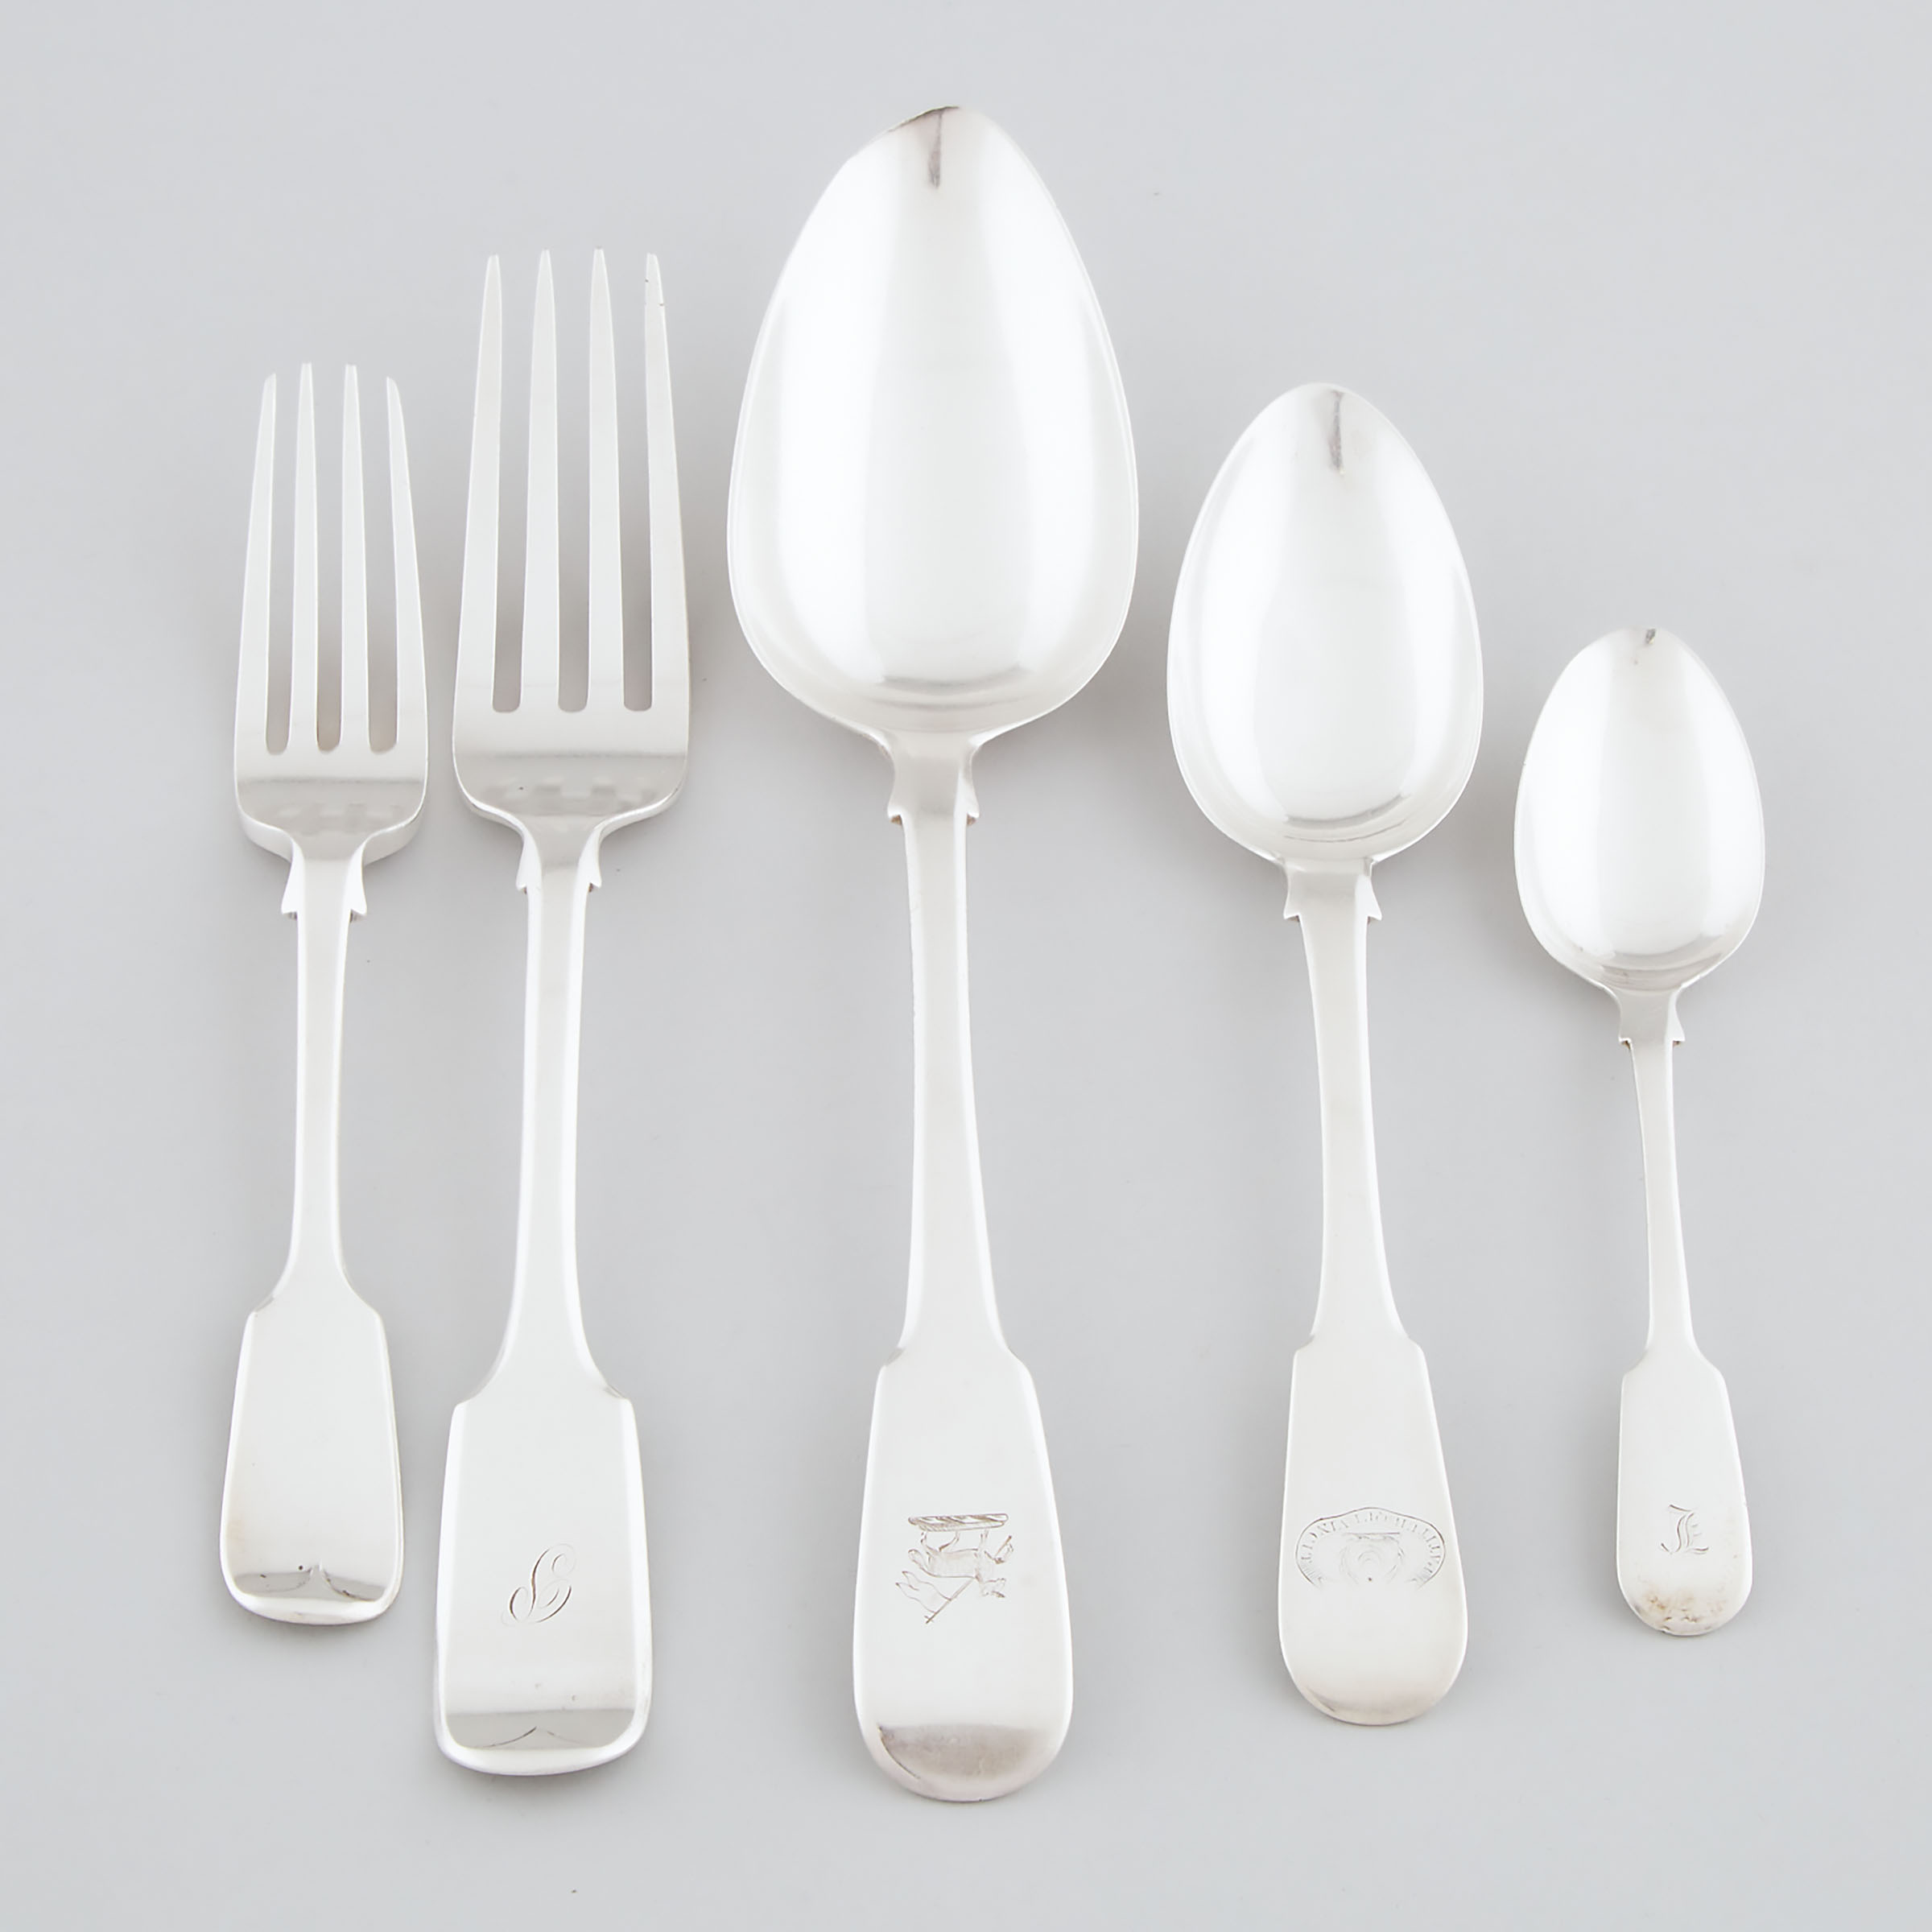 Assembled Georgian and Victorian Silver Fiddle Pattern Flatware, 19th century